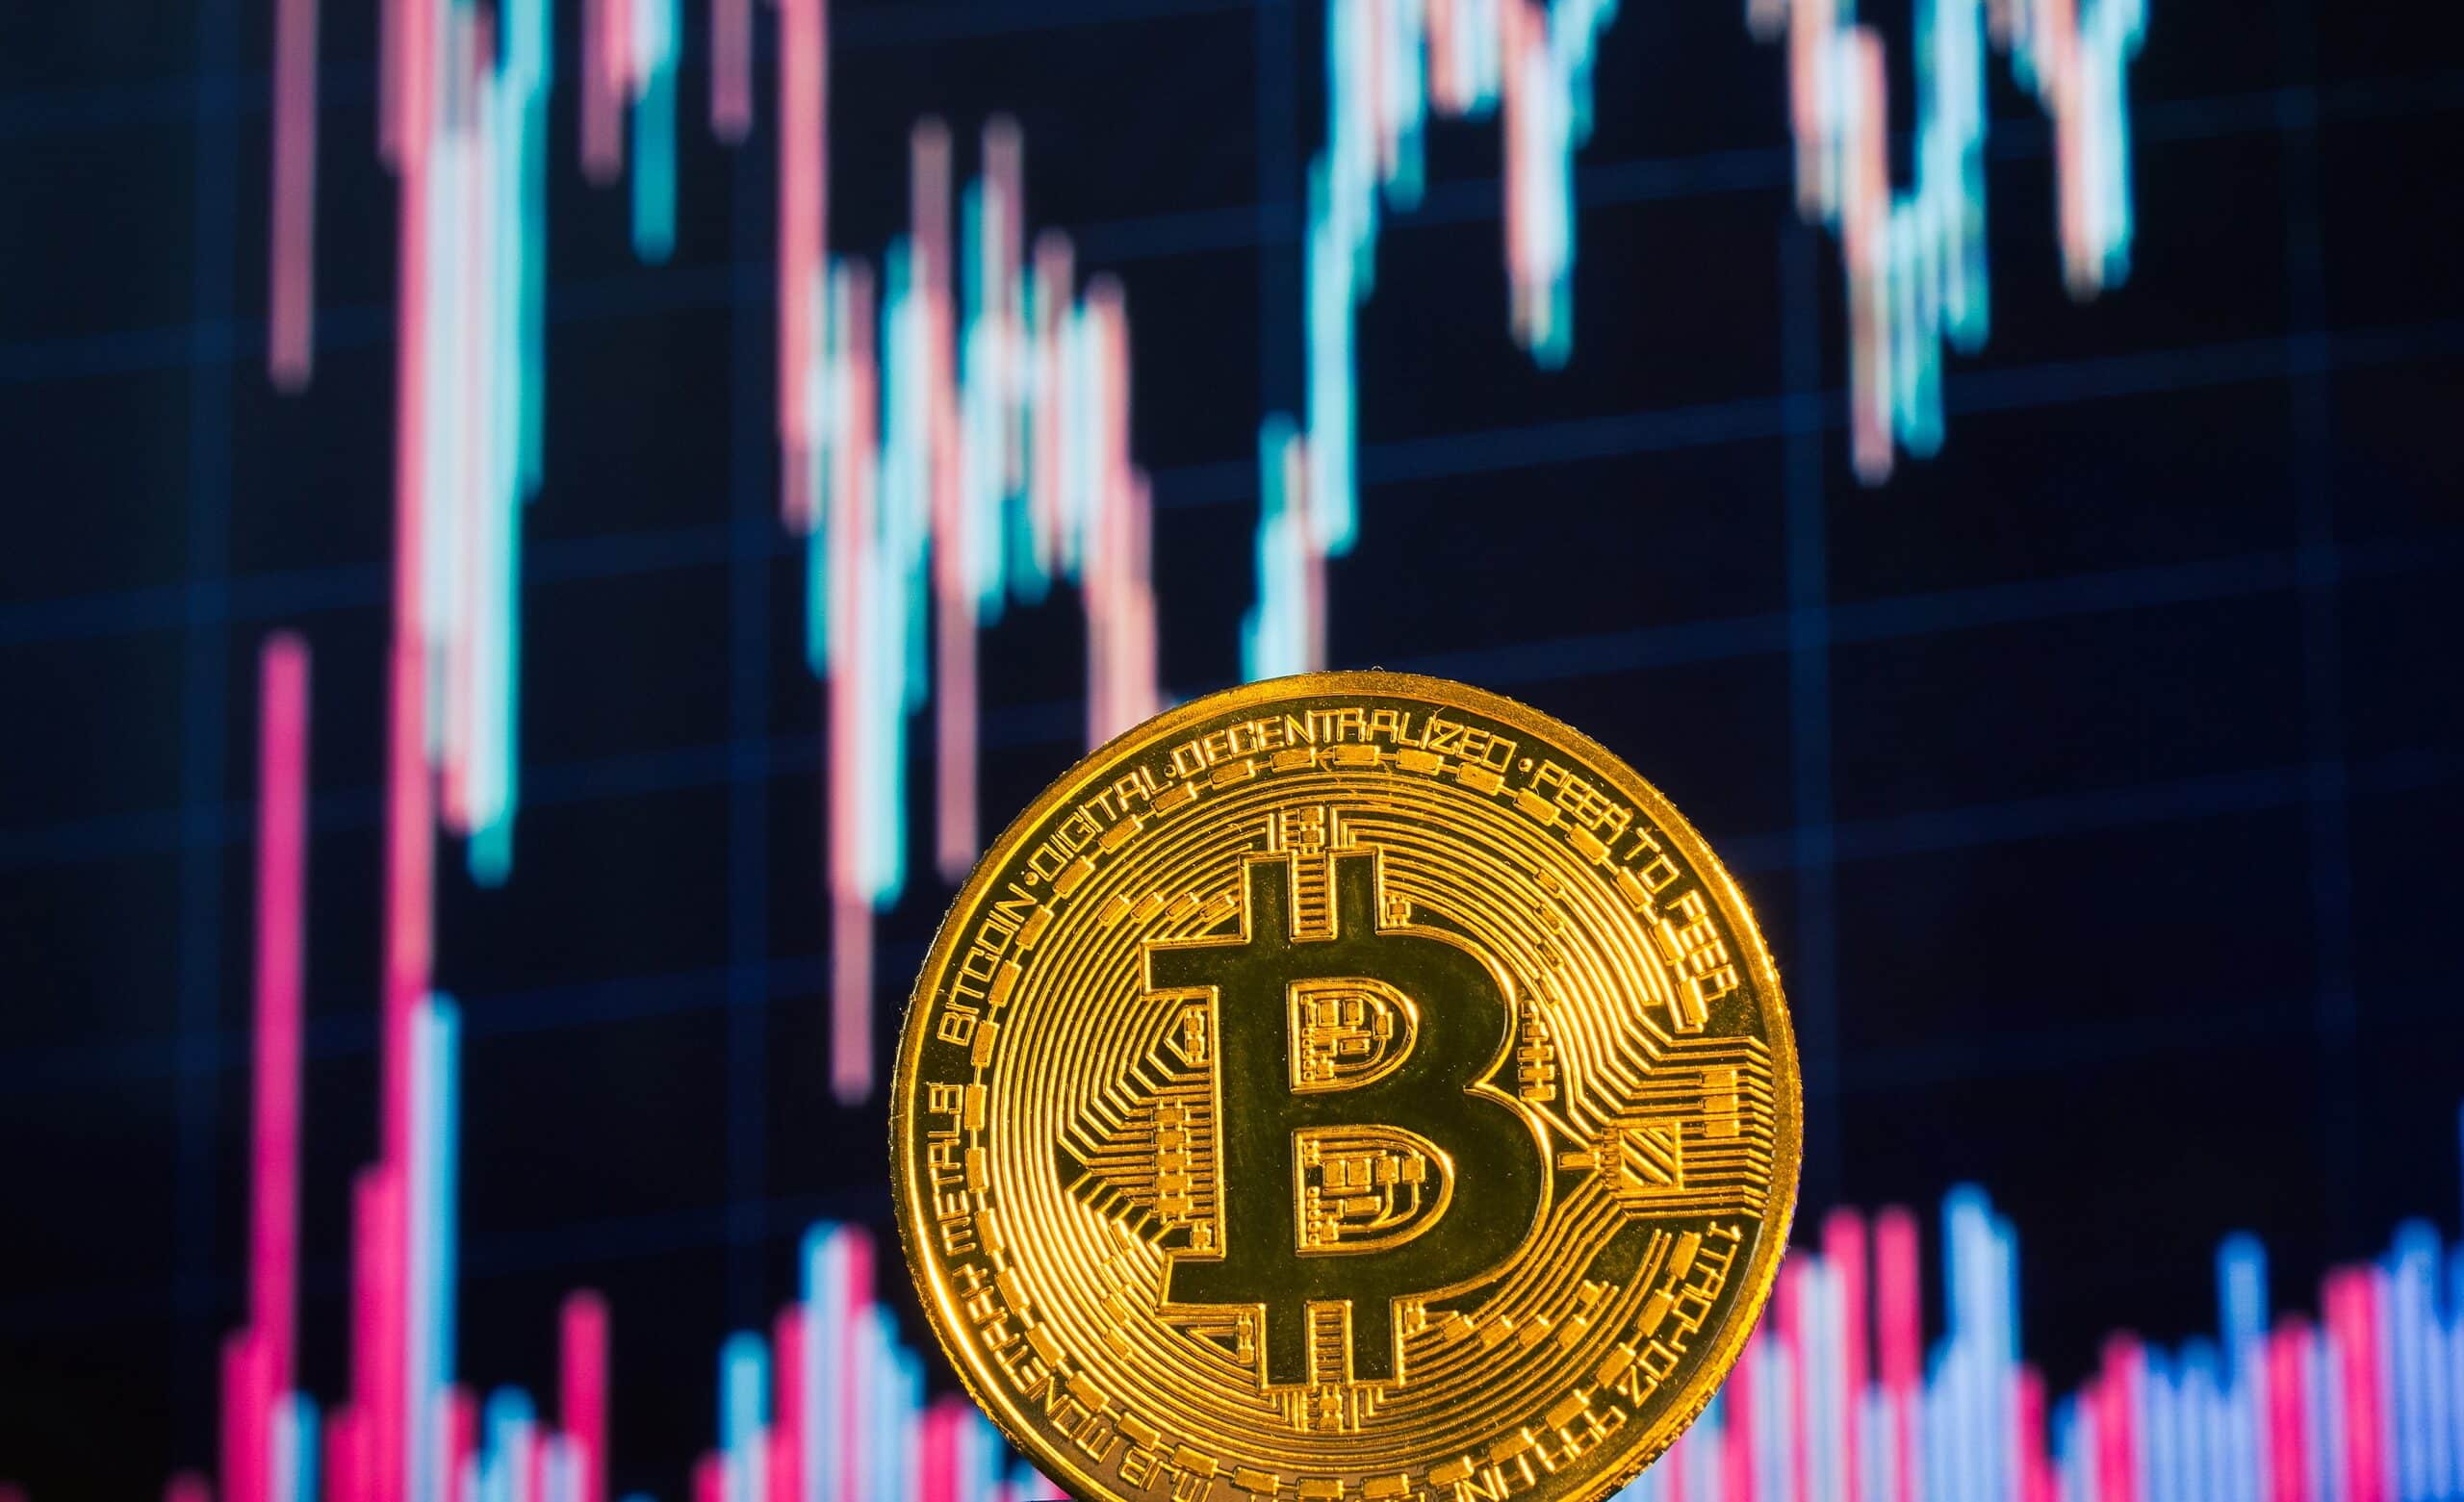 Bitcoin Realized Cap Reaches New Heights Amidst Market Volatility